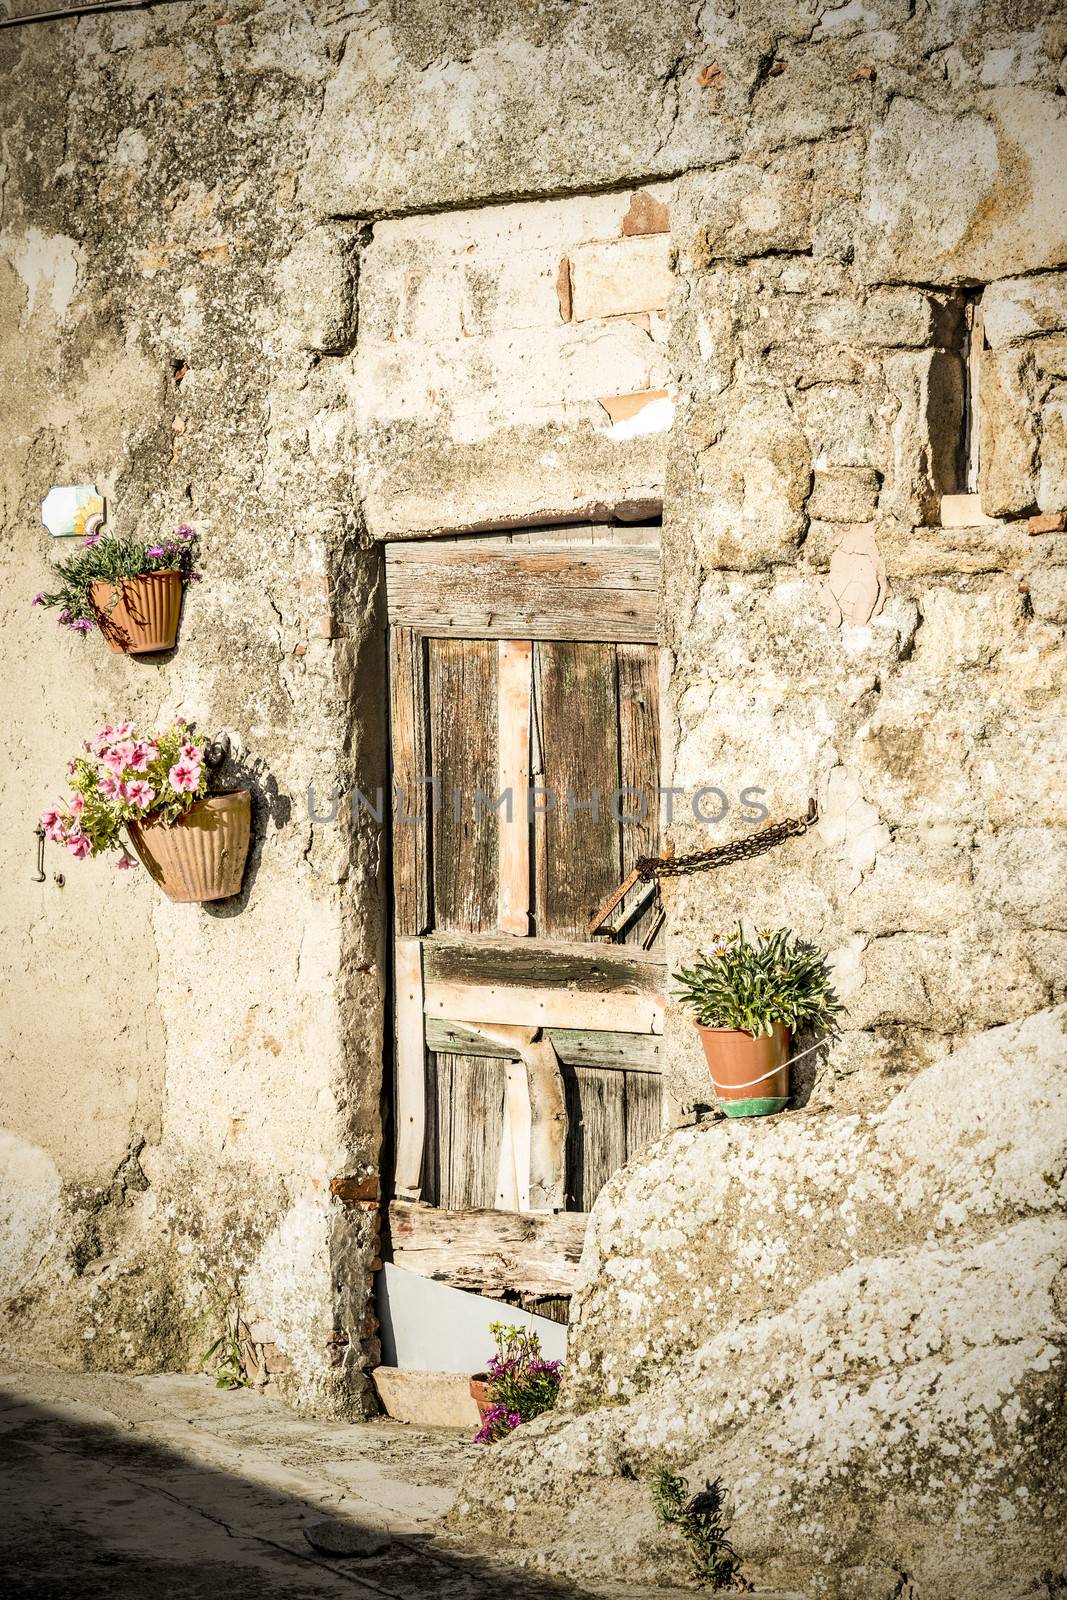 Picture of a door of a old house in tuscany, italy